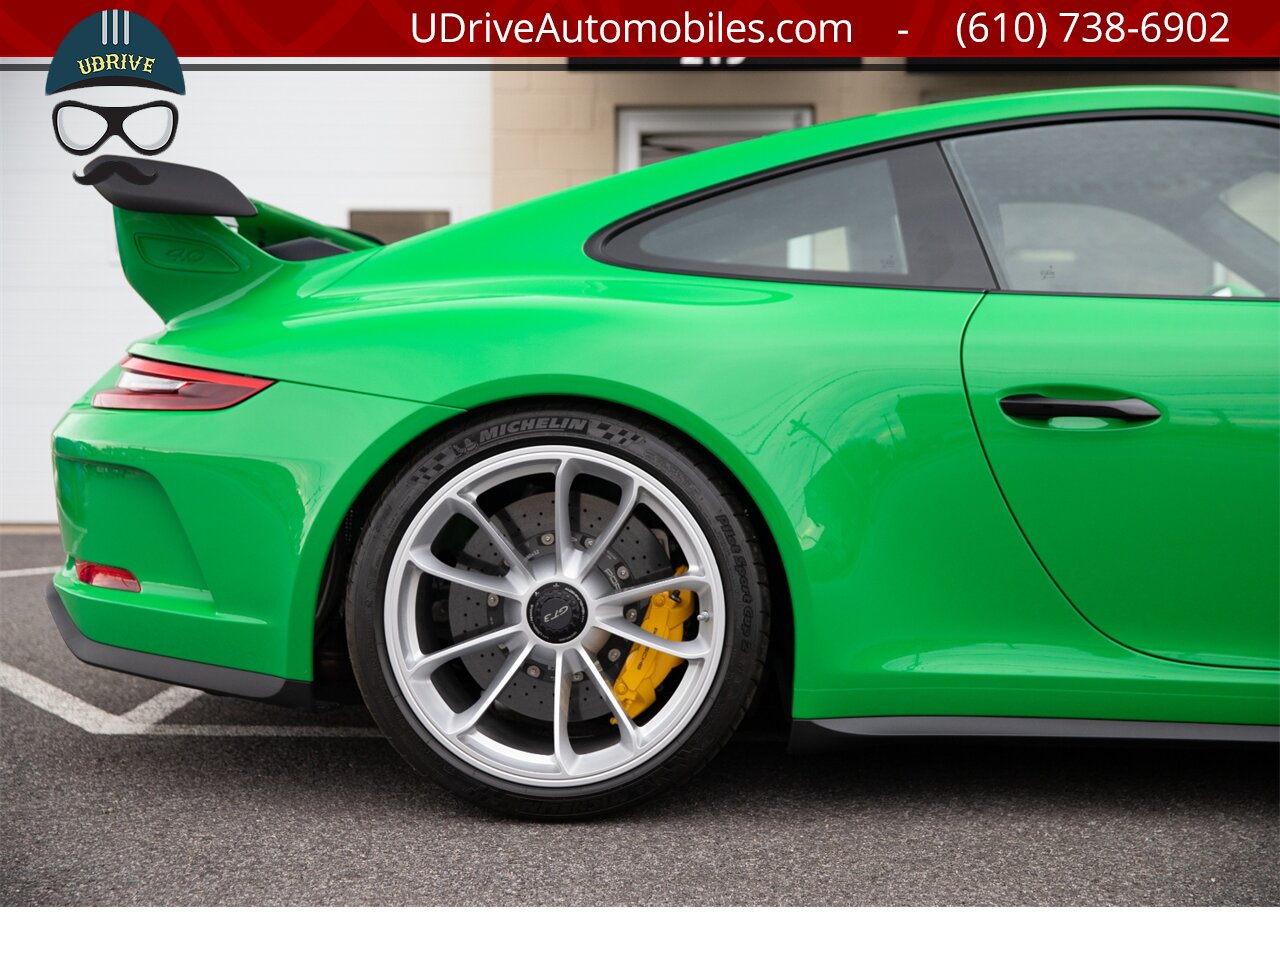 2018 Porsche 911 GT3 6 Speed Paint To Sample Viper Green 48 Miles  Front Axle Lift PCCB Carbon Bucket Seats - Photo 17 - West Chester, PA 19382